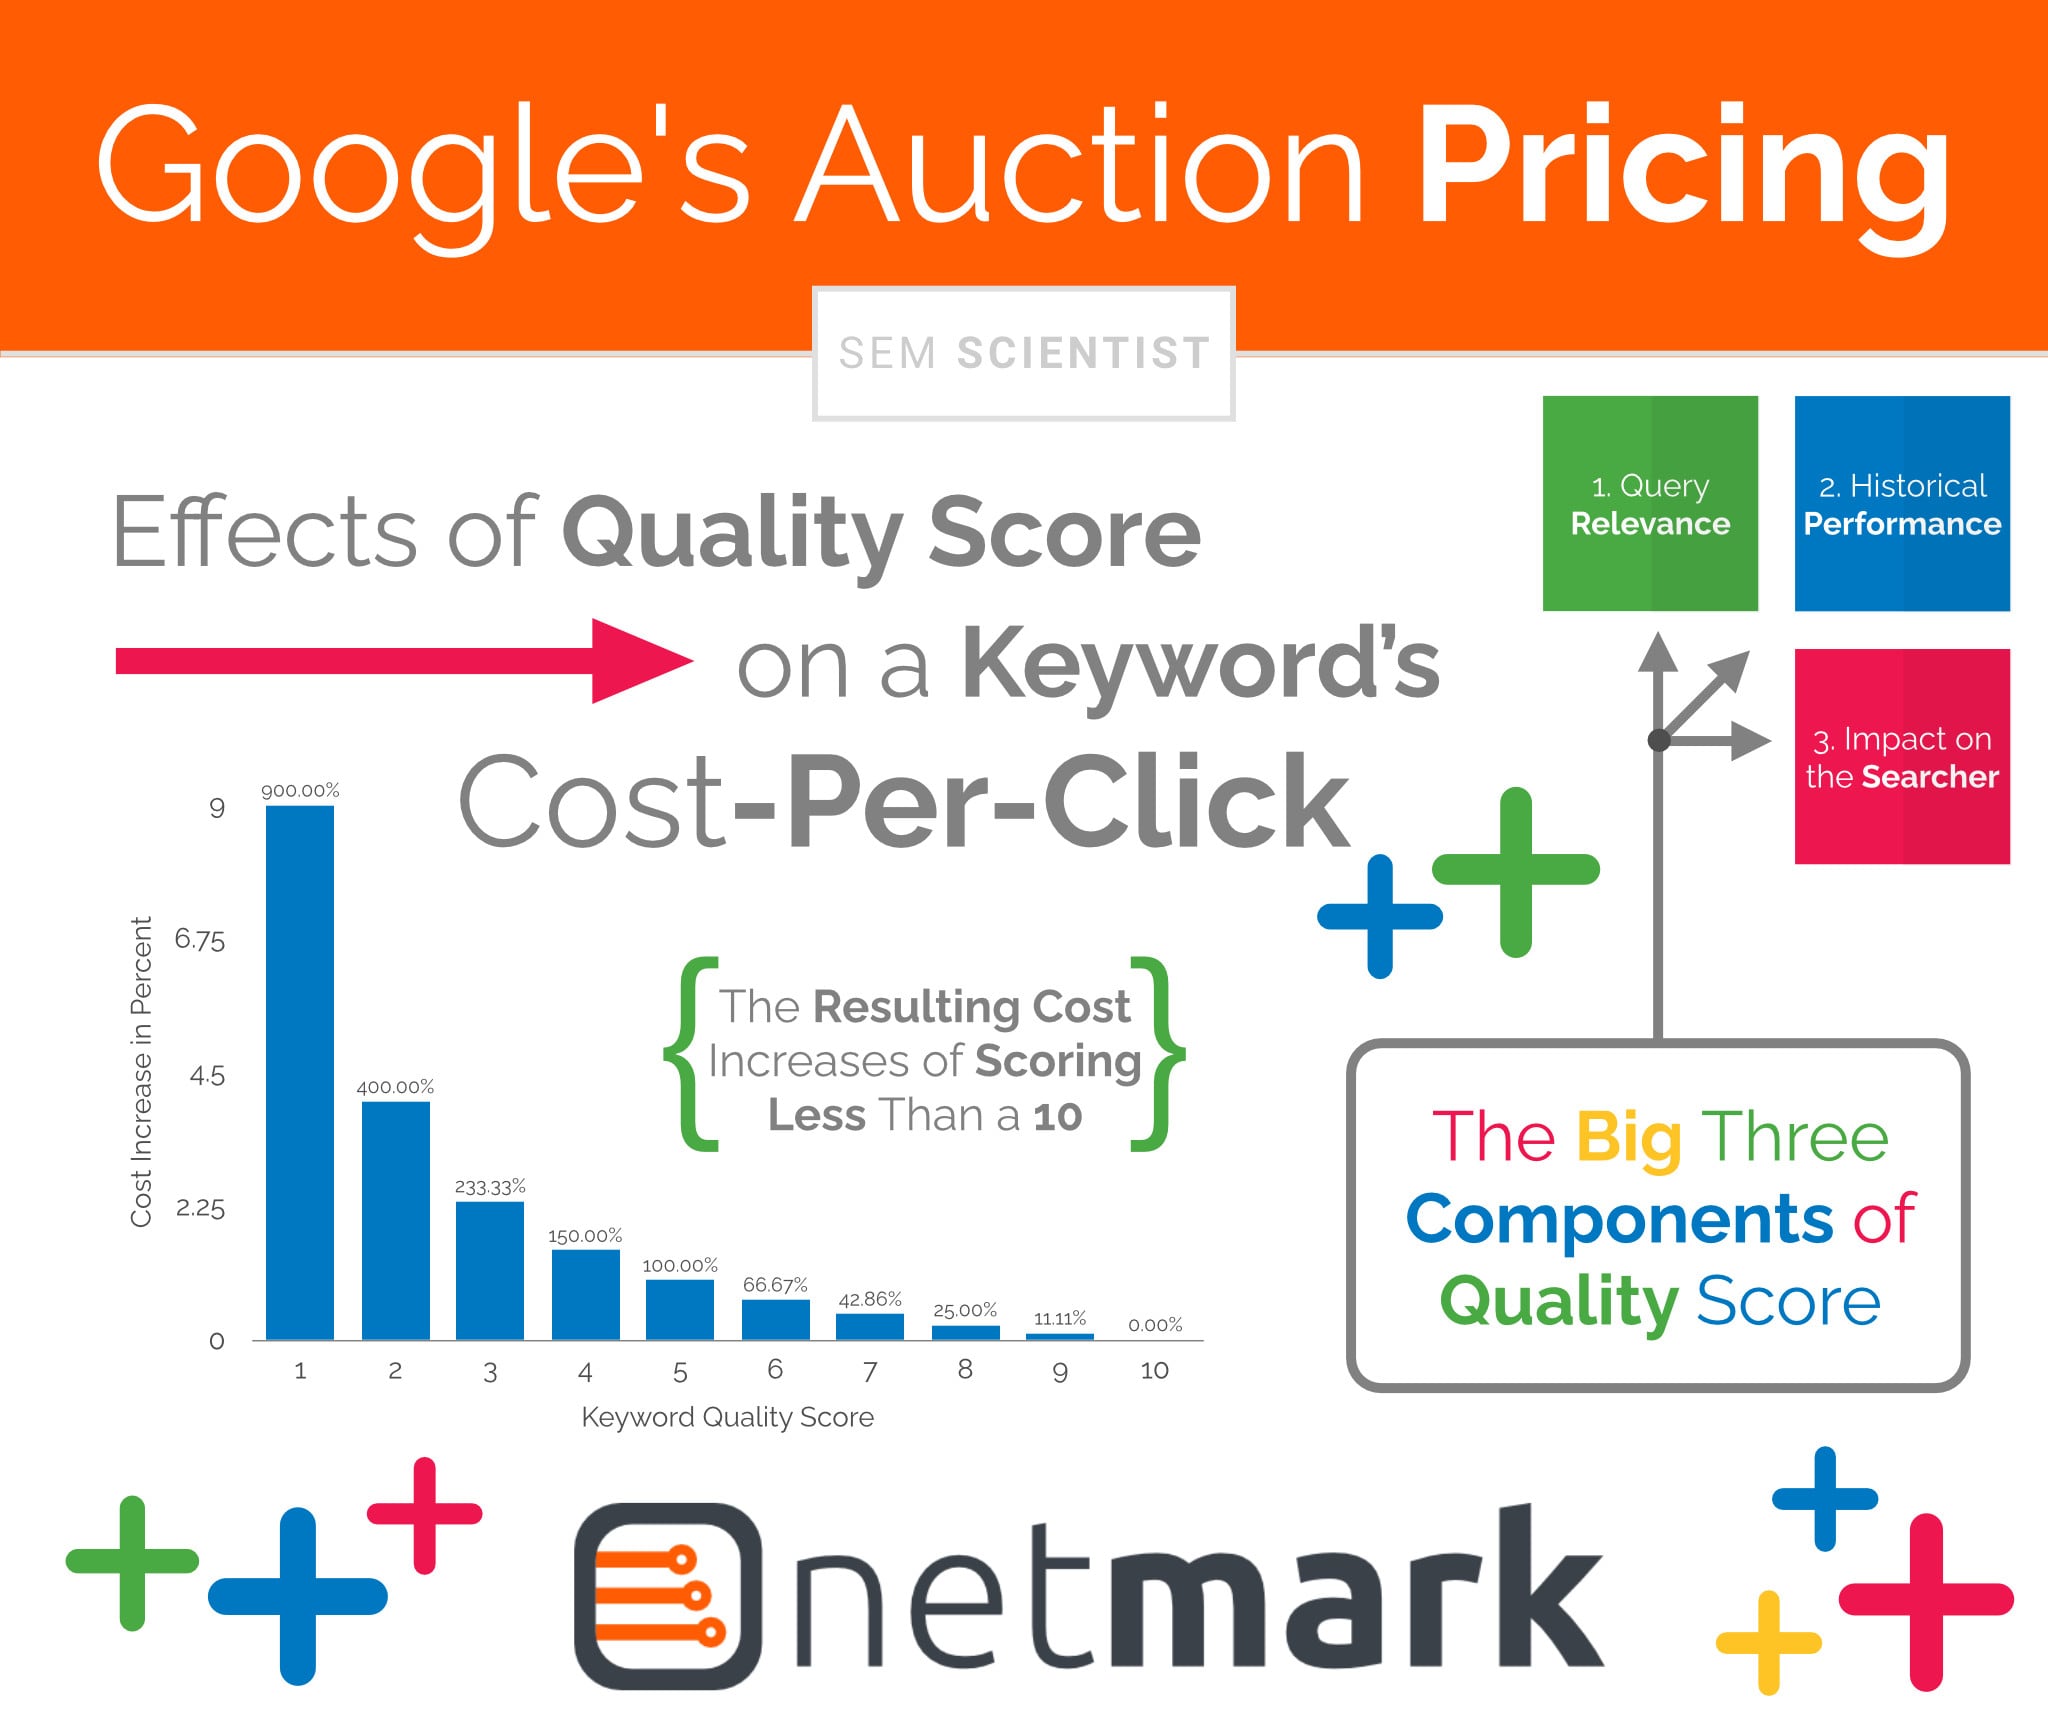 Google Ads Auction Pricing